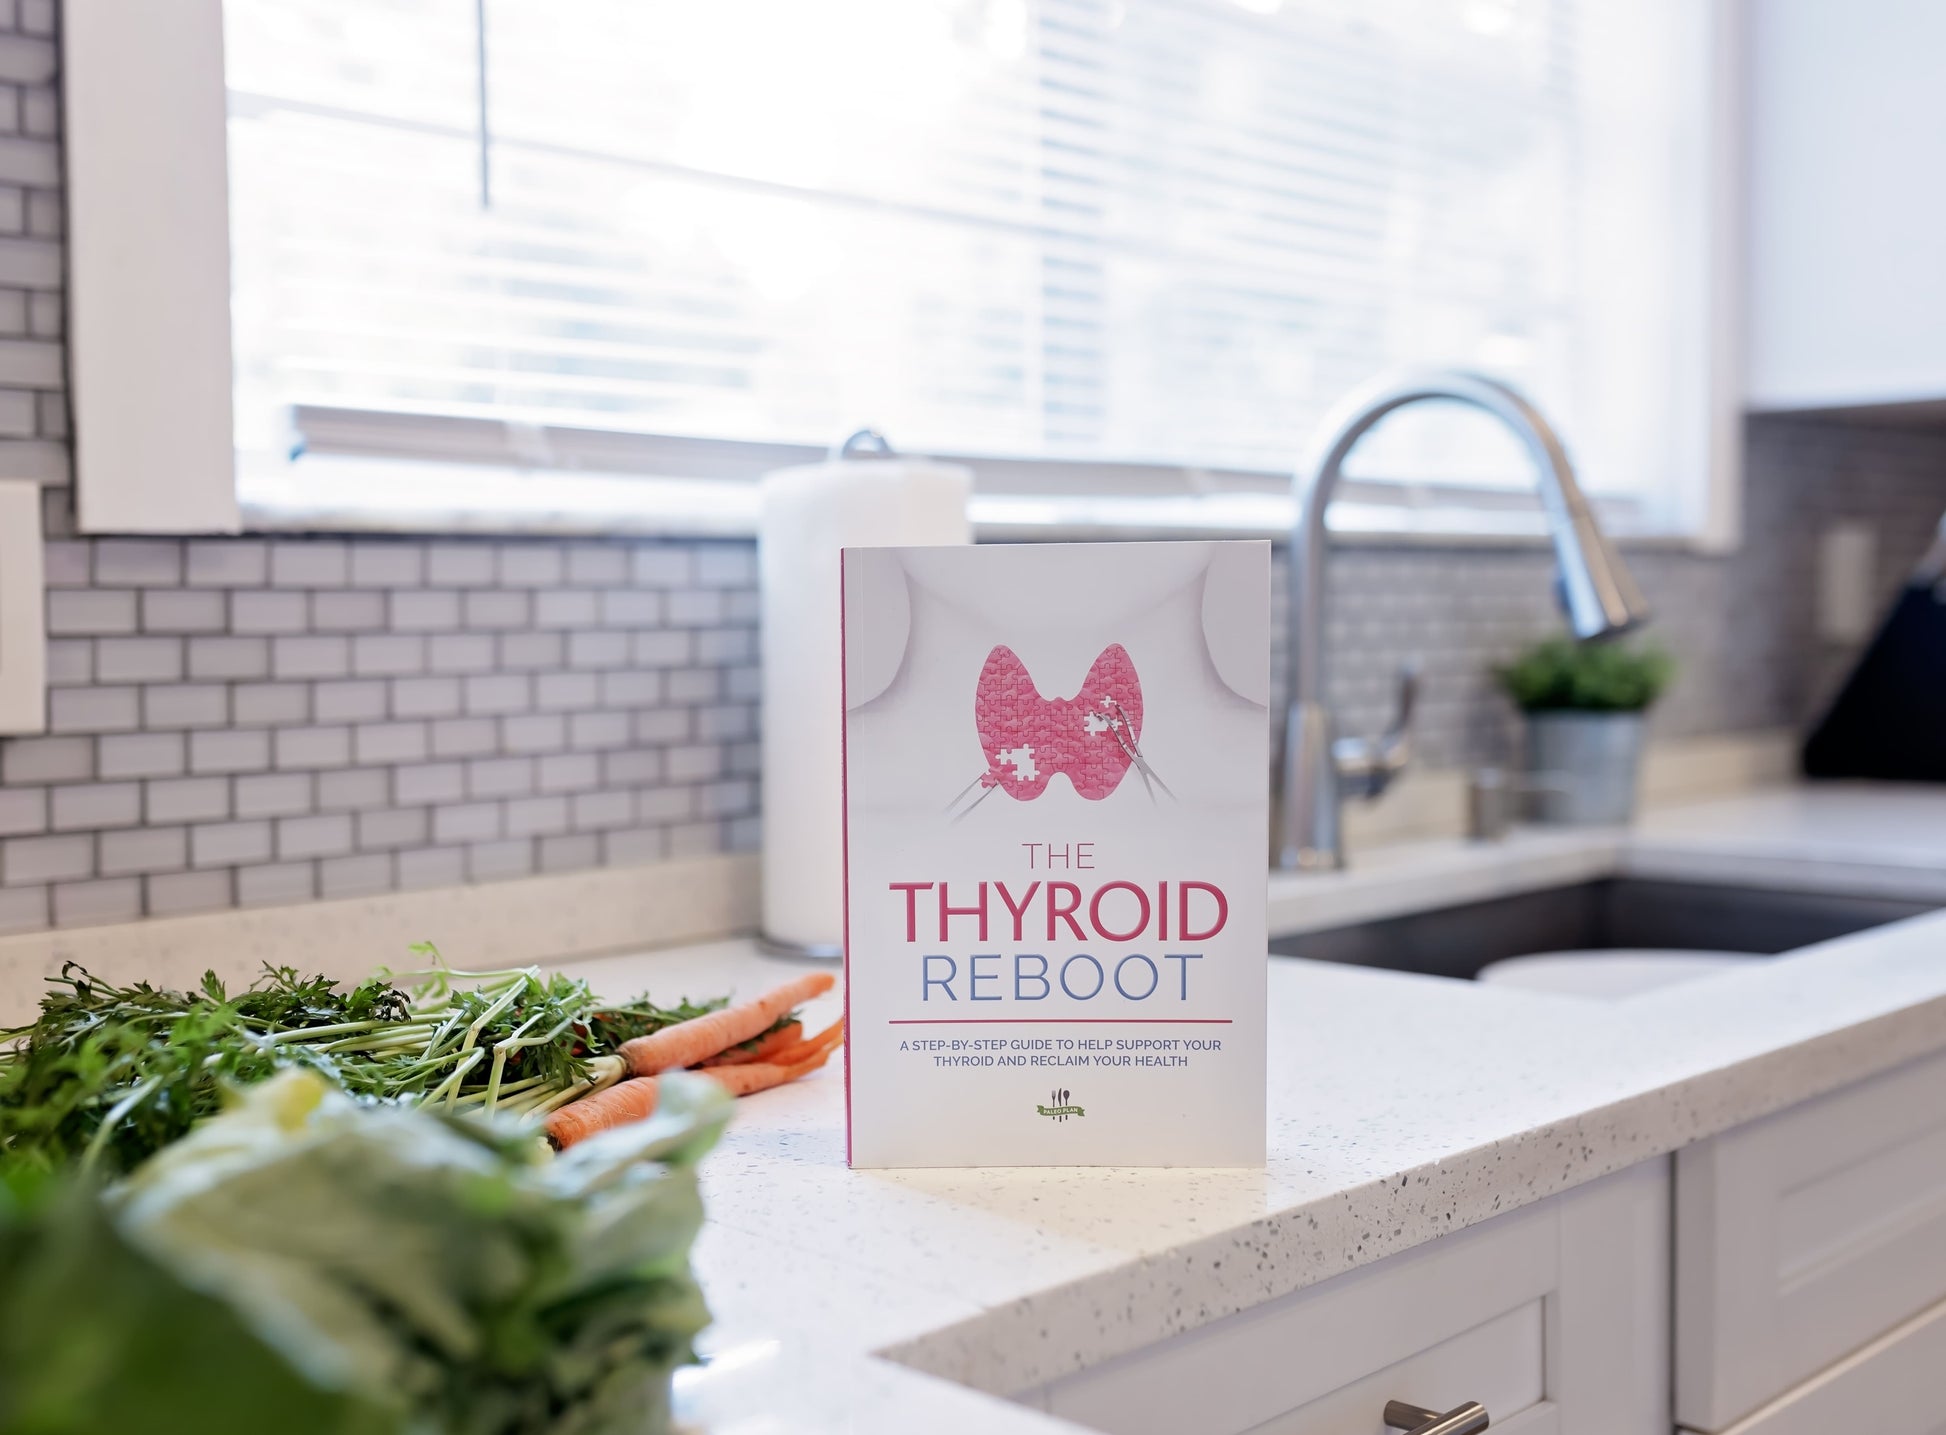 The Thyroid Reboot Book is seen standing on a white marble kitchen countertop, with vegetables in the background.